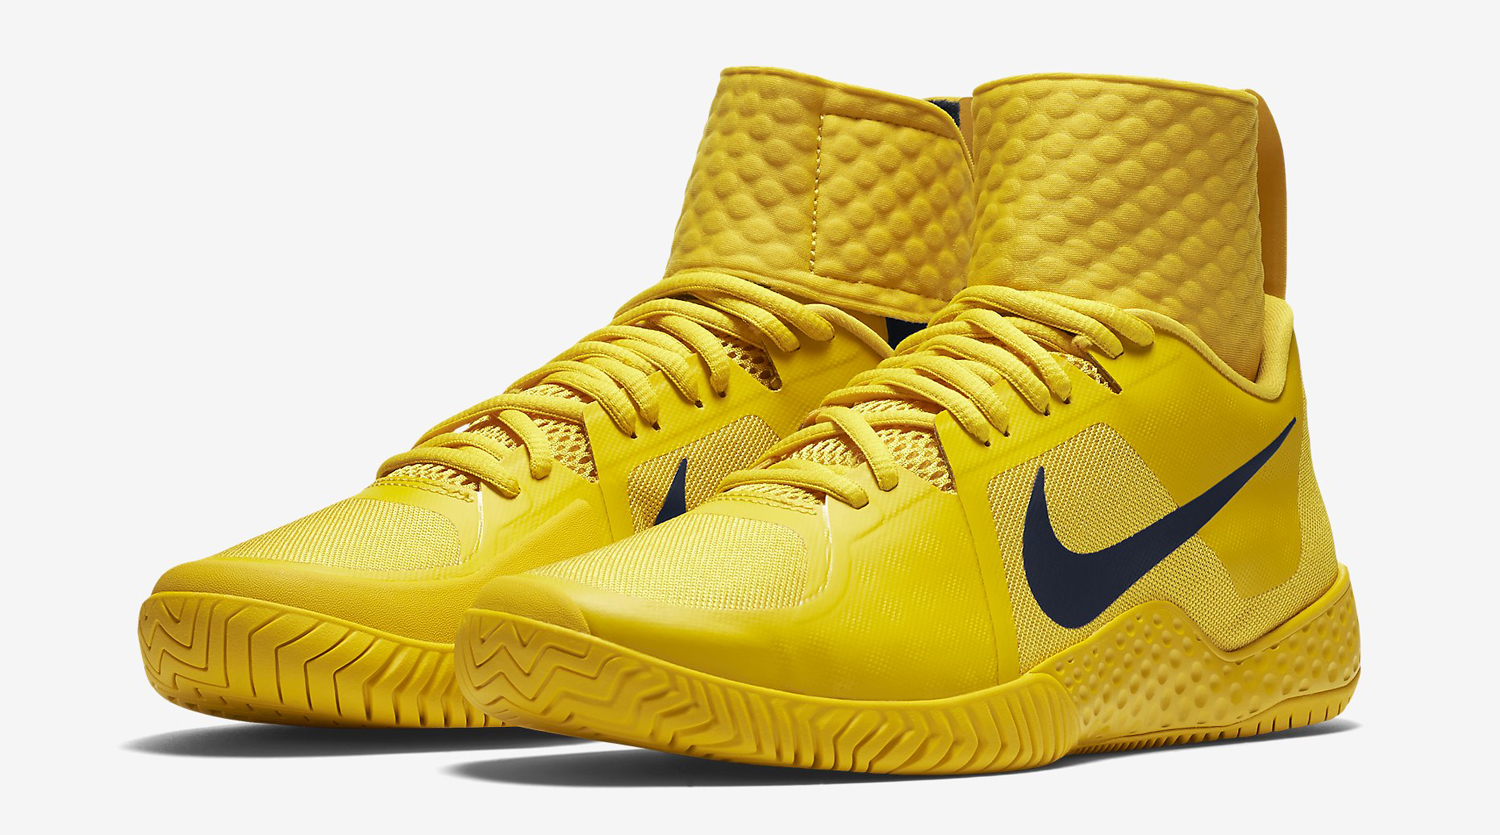 Nike Made Bruce Lee Sneakers for Serena Williams | Sole Collector1500 x 835